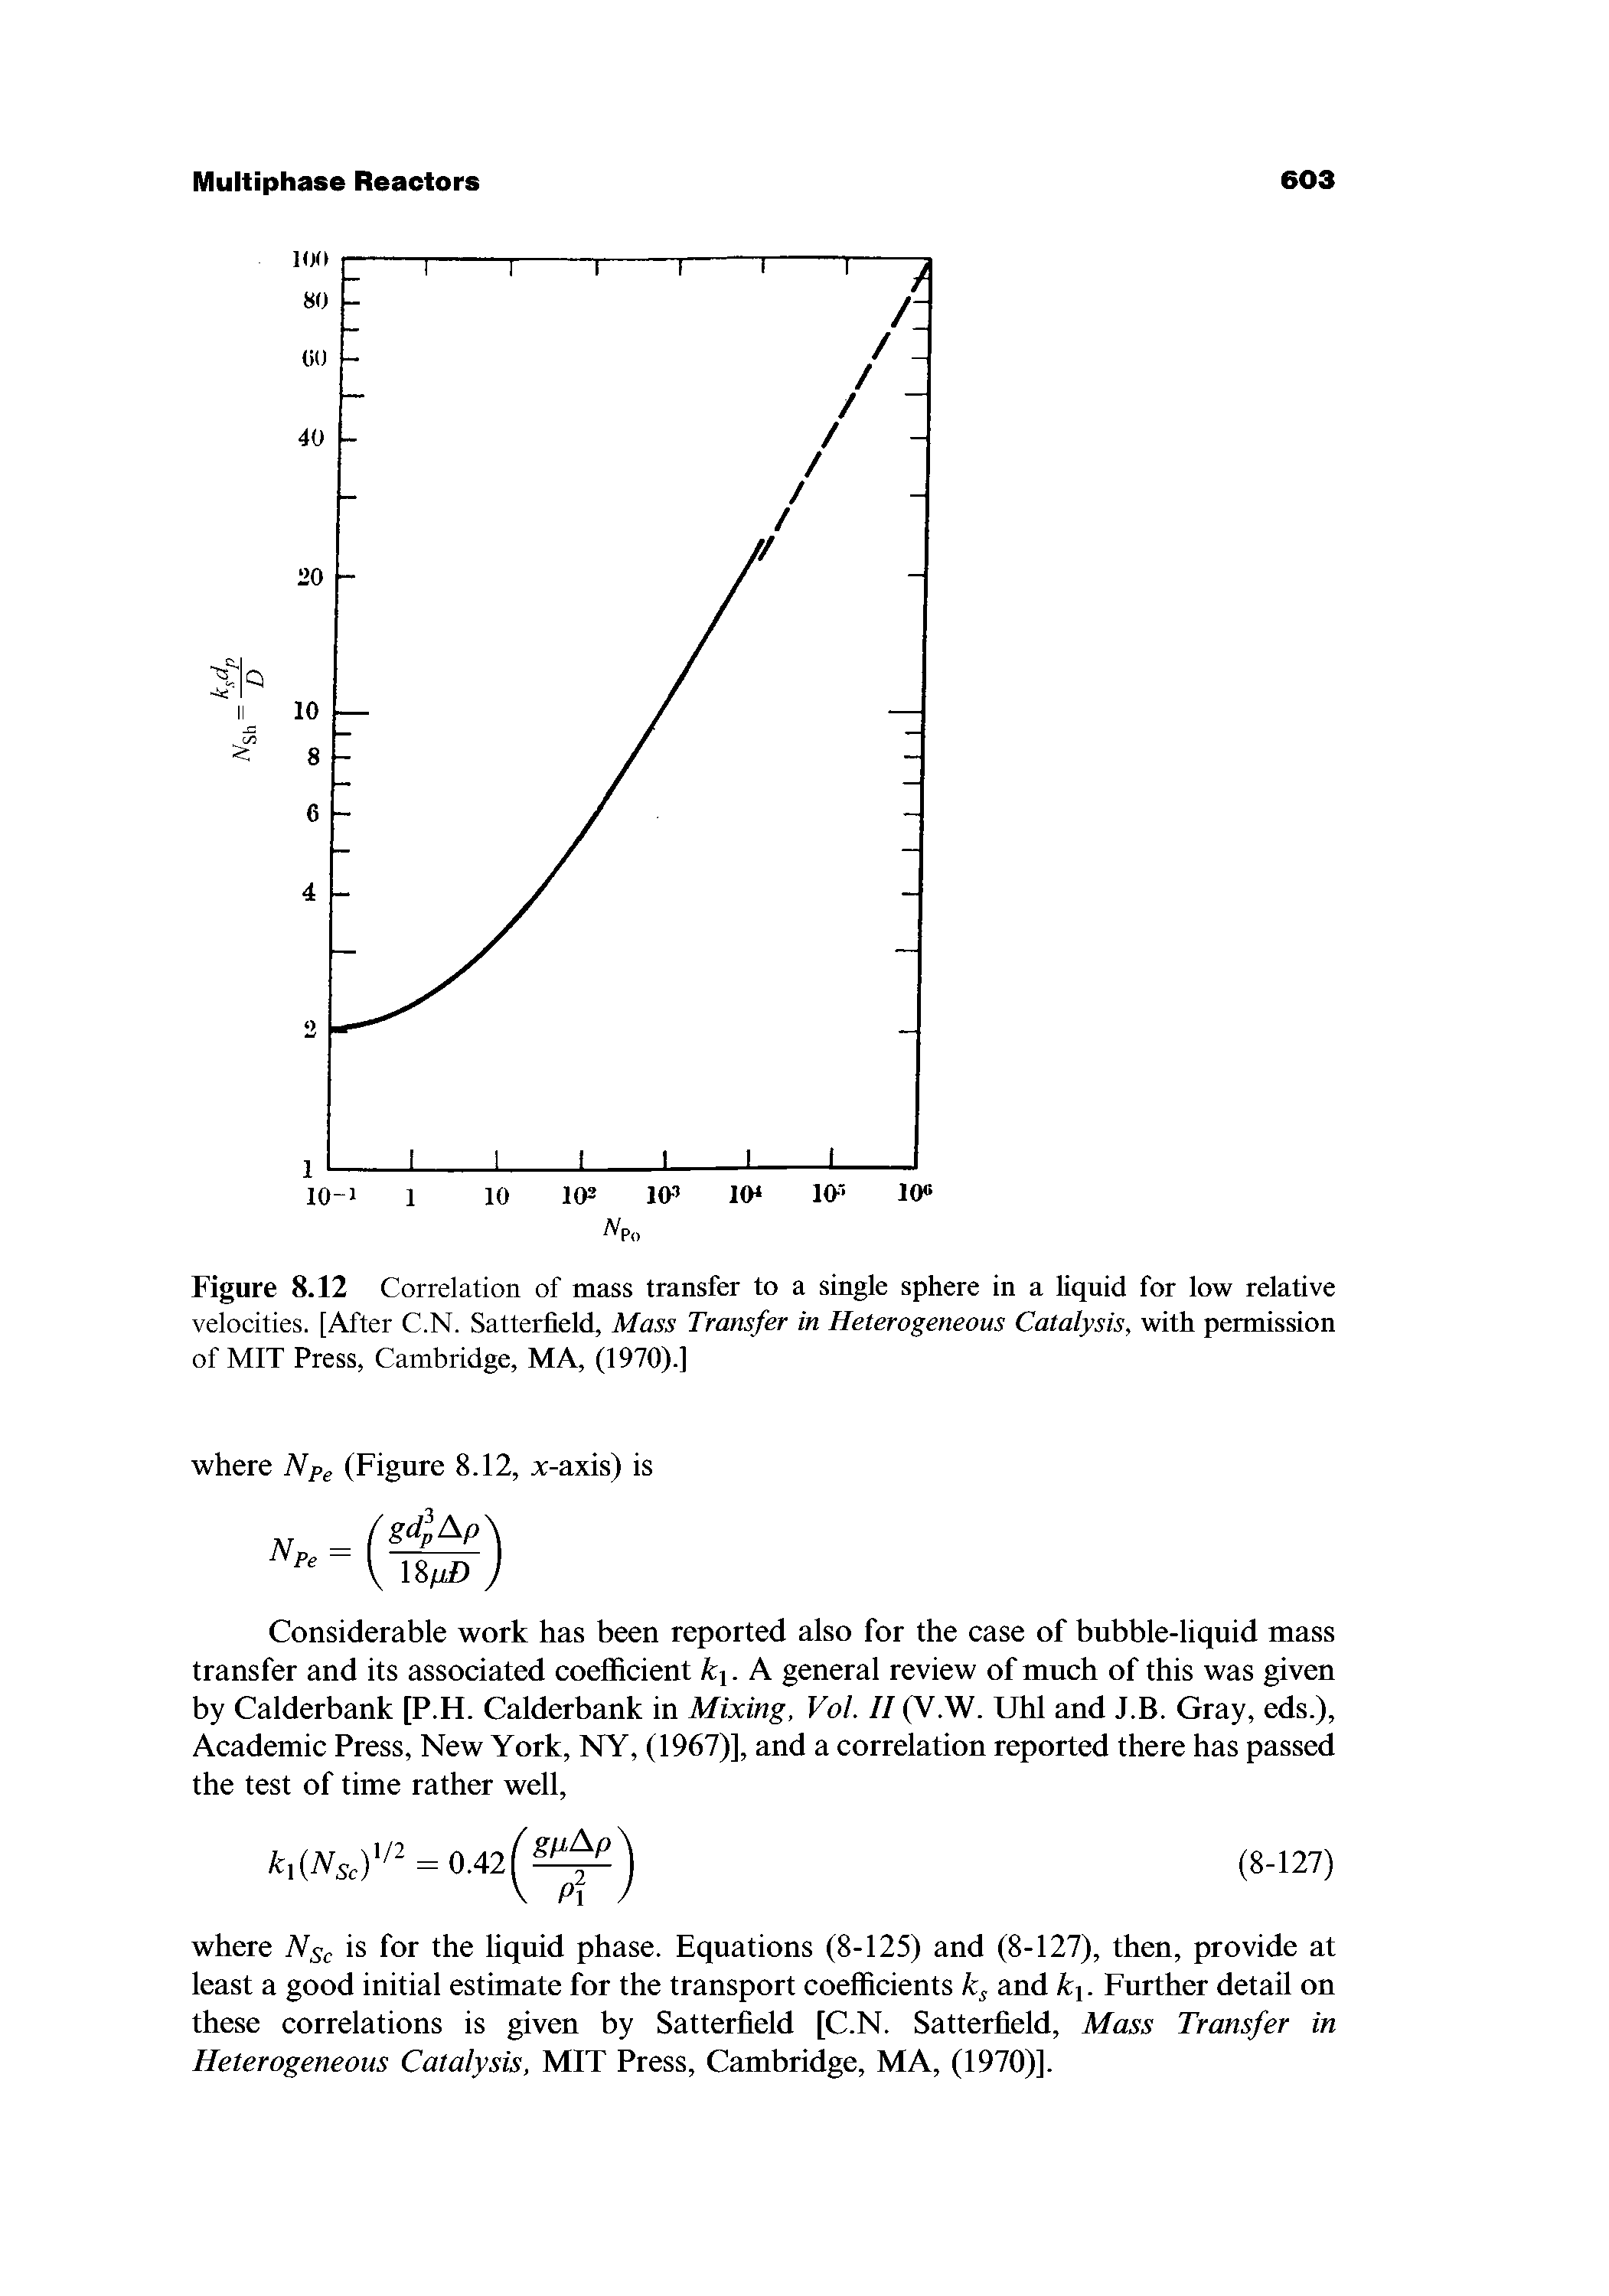 Figure 8.12 Correlation of mass transfer to a single sphere in a liquid for low relative velocities. [After C.N. Satterfield, Mass Transfer in Heterogeneous Catalysis, with permission of MIT Press, Cambridge, MA, (1970).]...